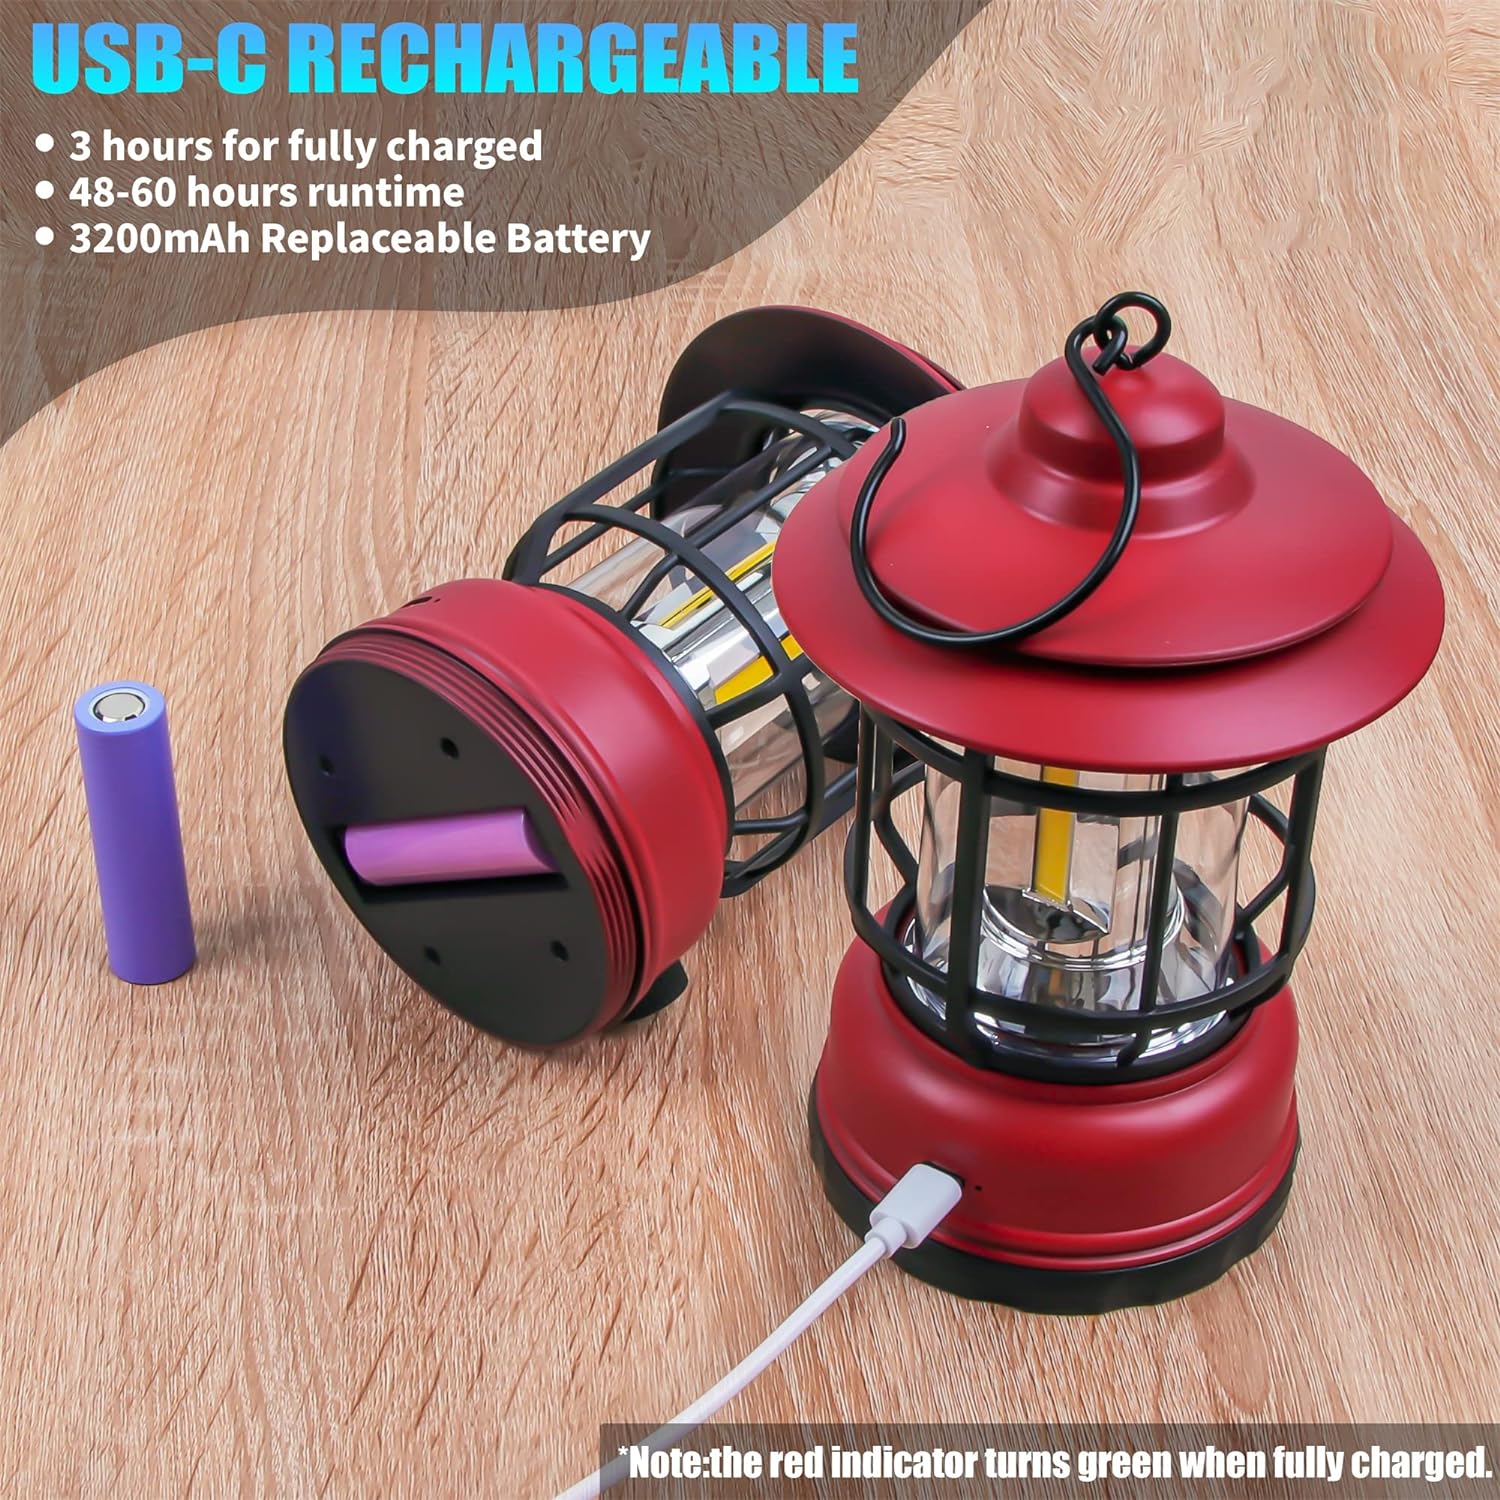 GEMIC Rechargeable Camping Lantern, Retro Metal Camping Lantern, Dimmable COB LED Chip Tent Light for Camping, Emergency, Fishing, Hiking.